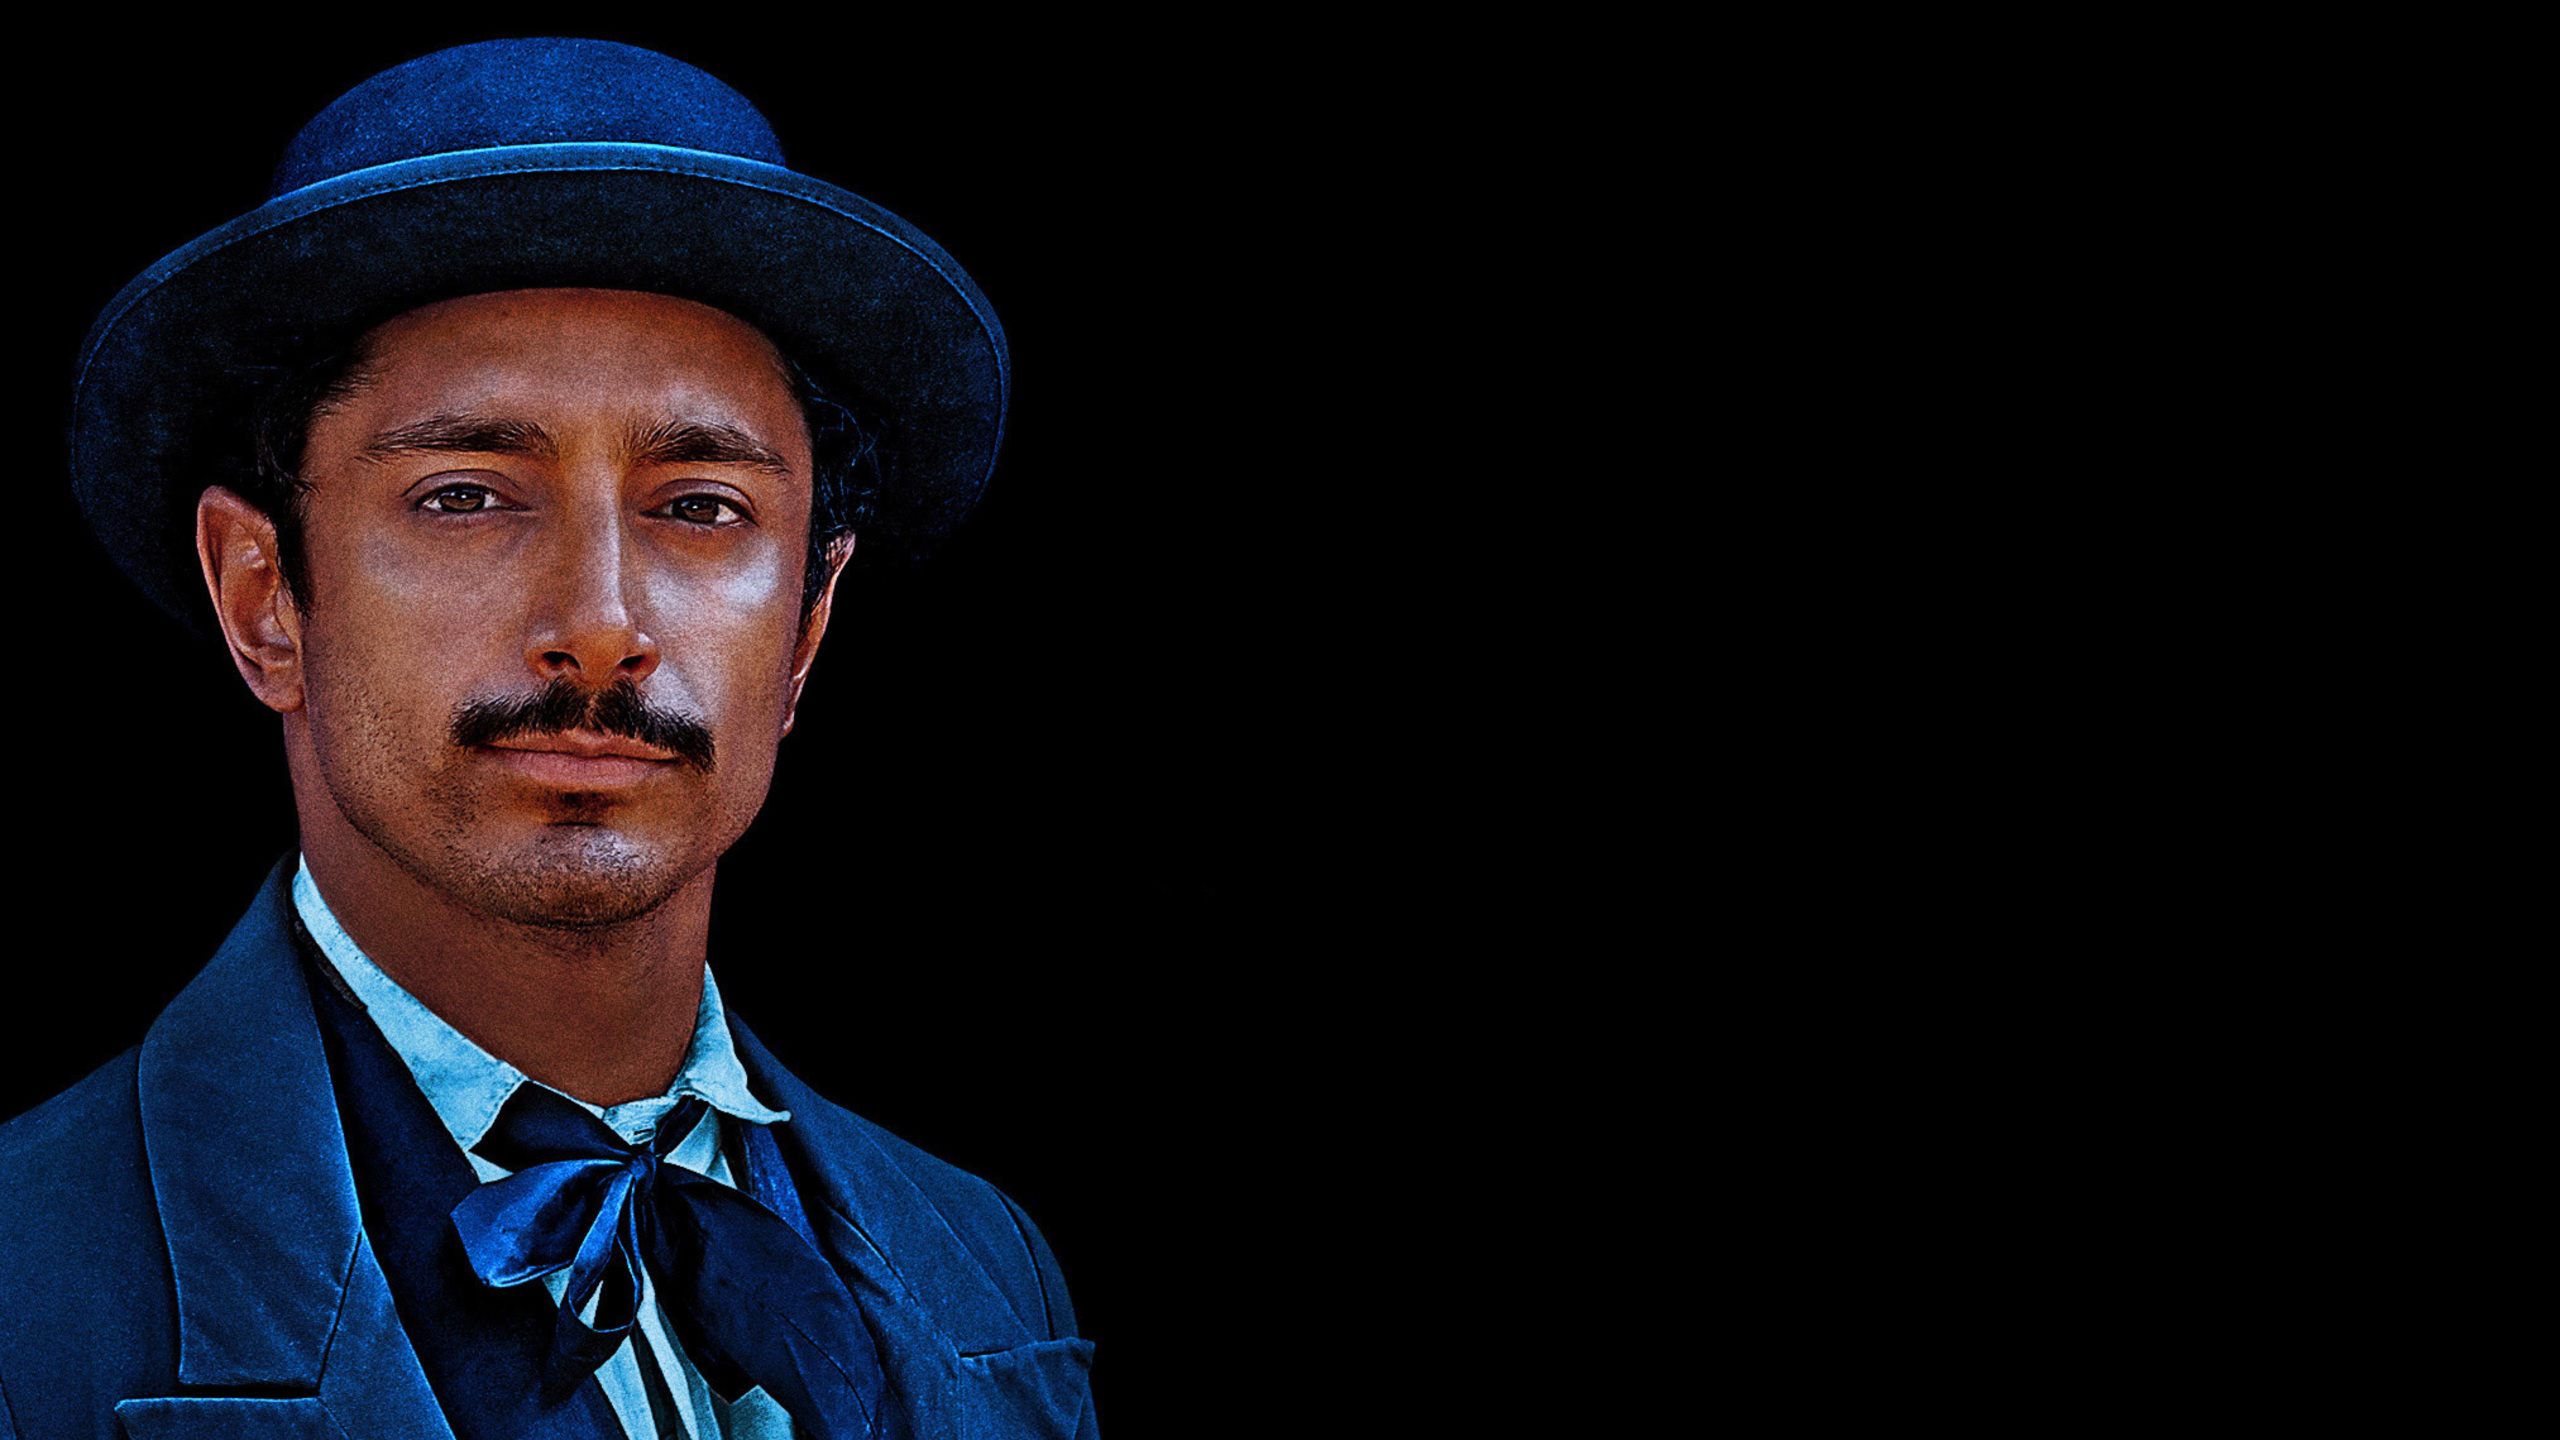 Riz Ahmed, Hermann Kermit Warm, The Sisters Brothers movie, High-quality images, 2560x1440 HD Desktop